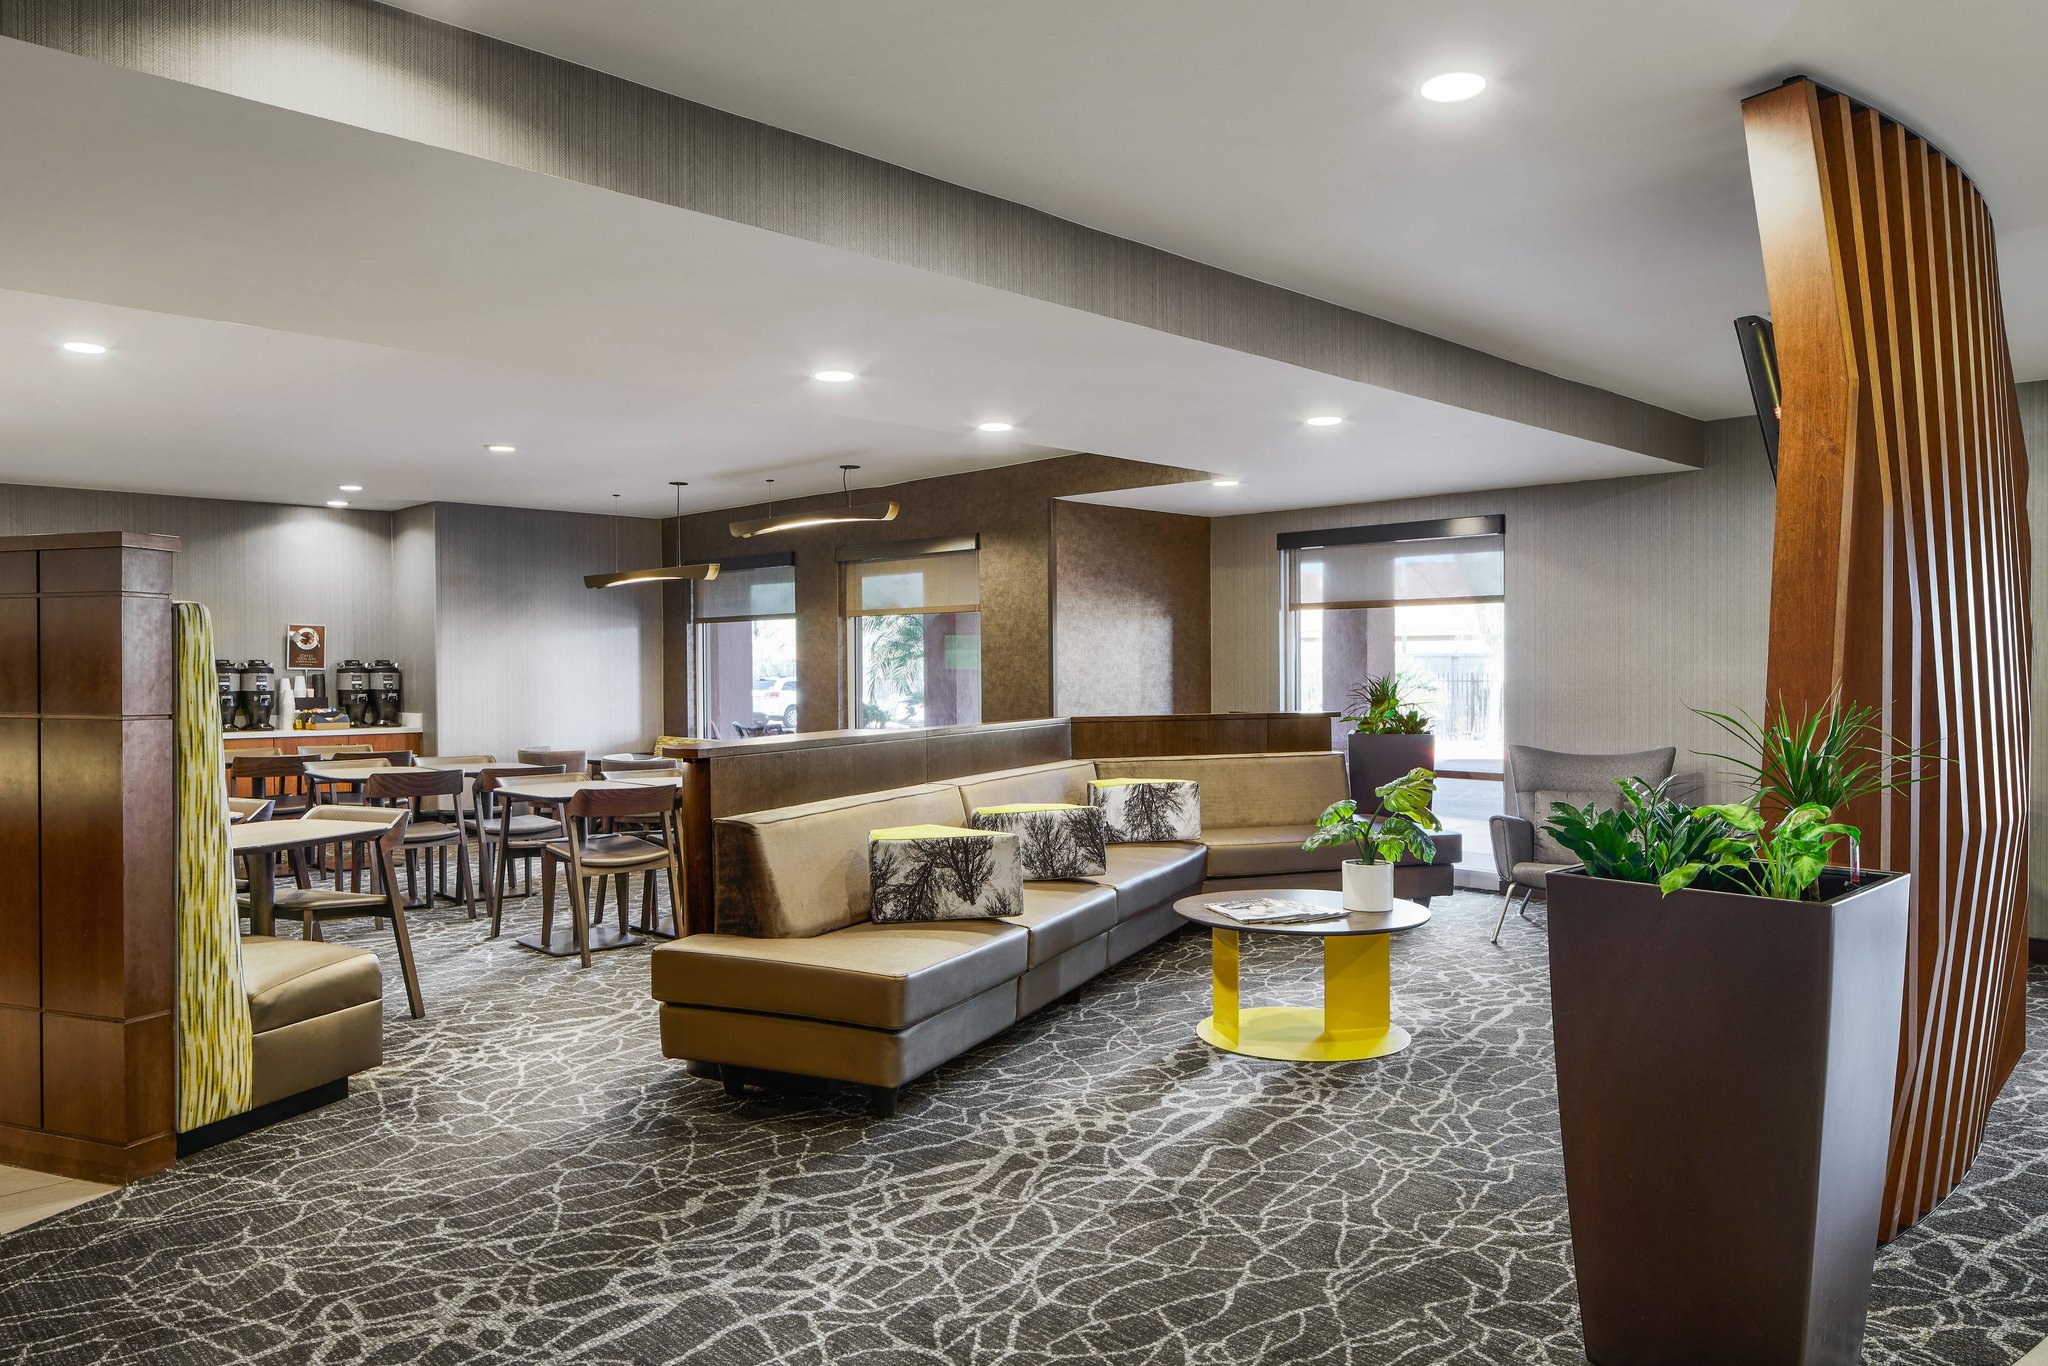 Springhill Suites Tempe At Arizona Mills Mall